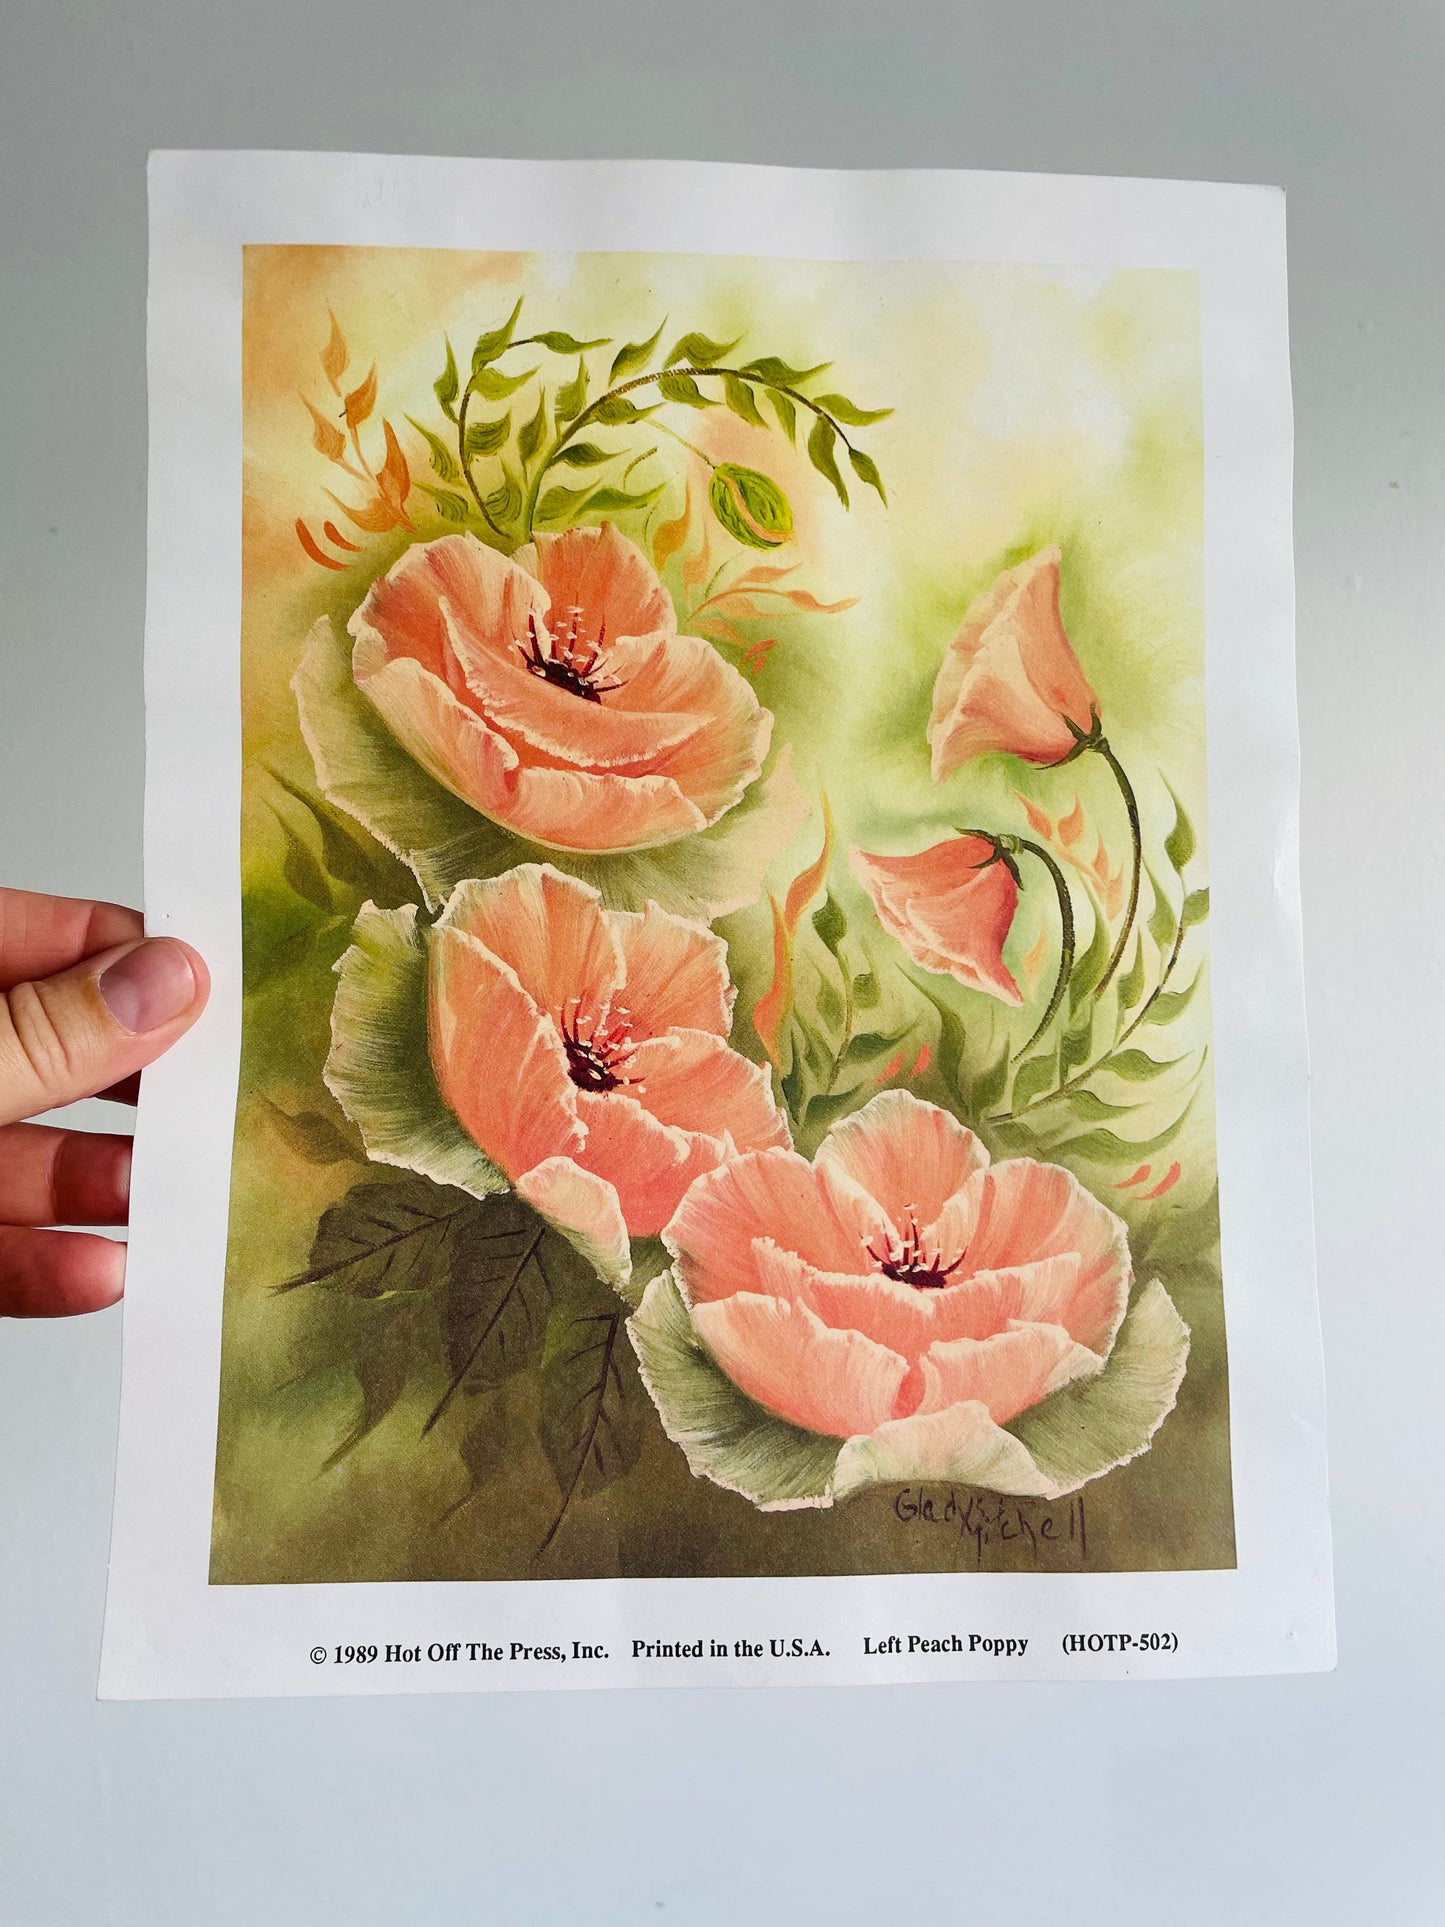 Peach Poppies by Gladys Mitchell (1989) Hot Off The Press Inc. - Floral Lithograph Print Ready for Framing!